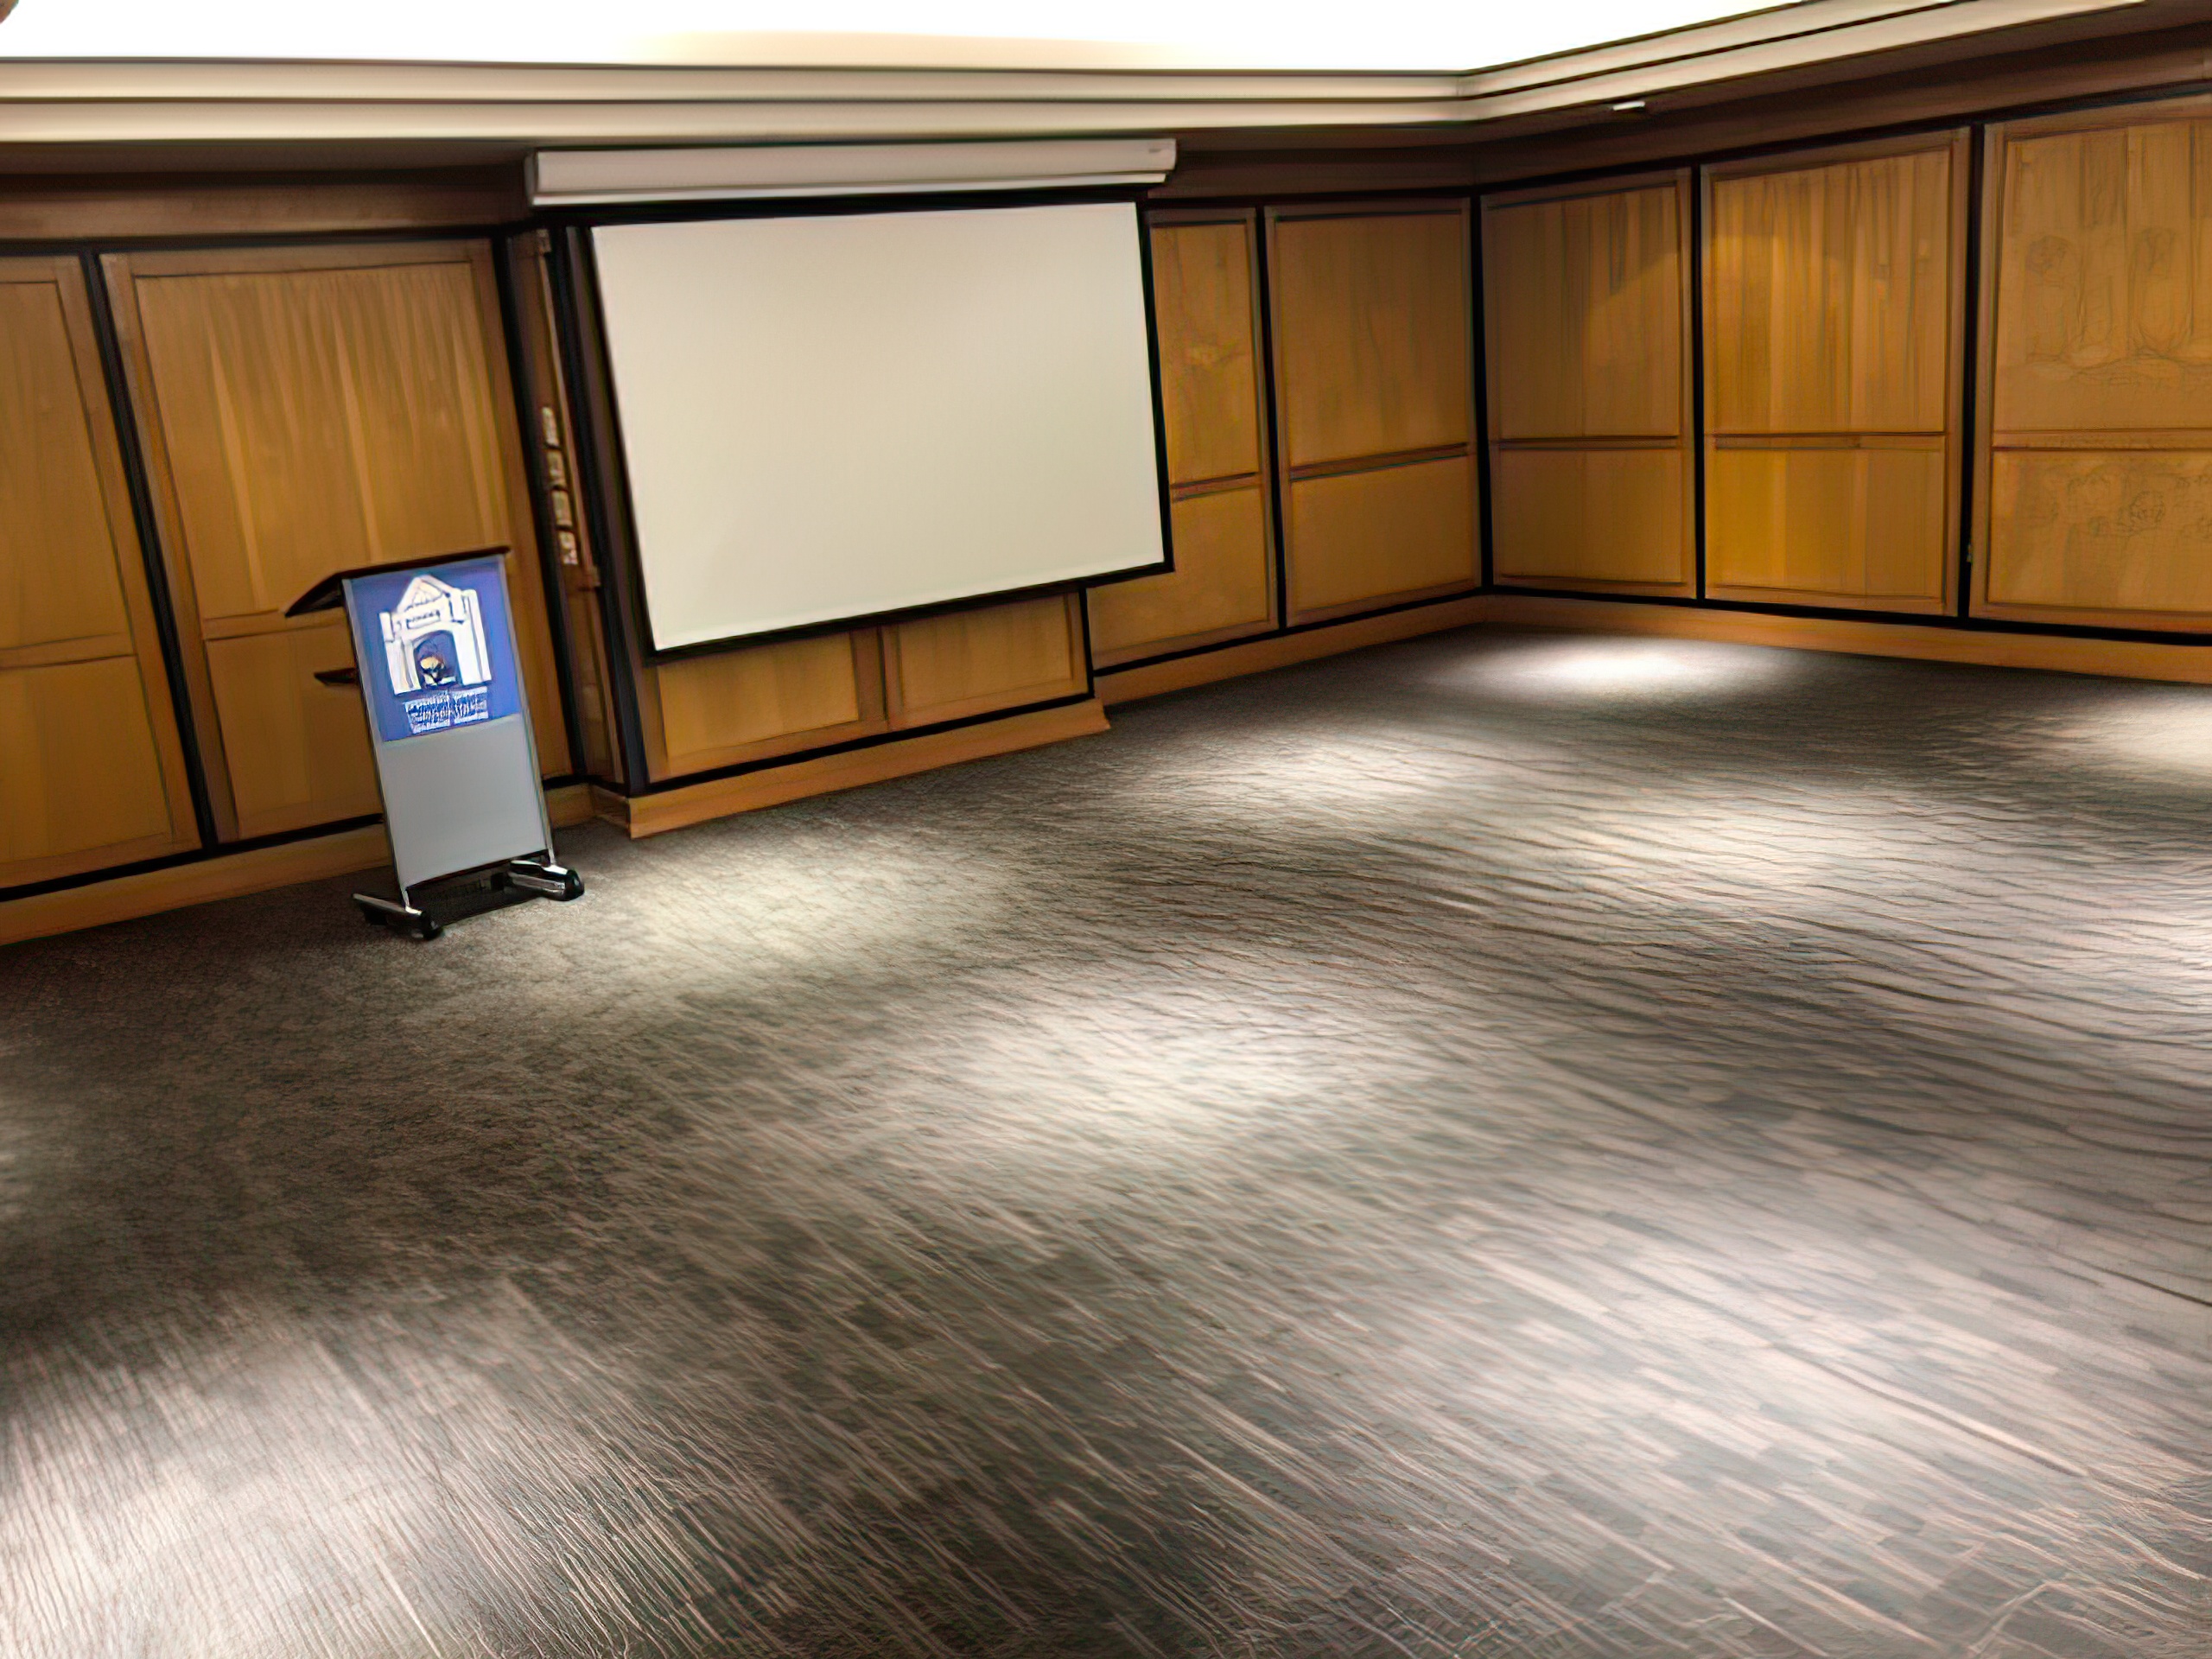 A speaker's podium and dropdown view-screen before an open room.